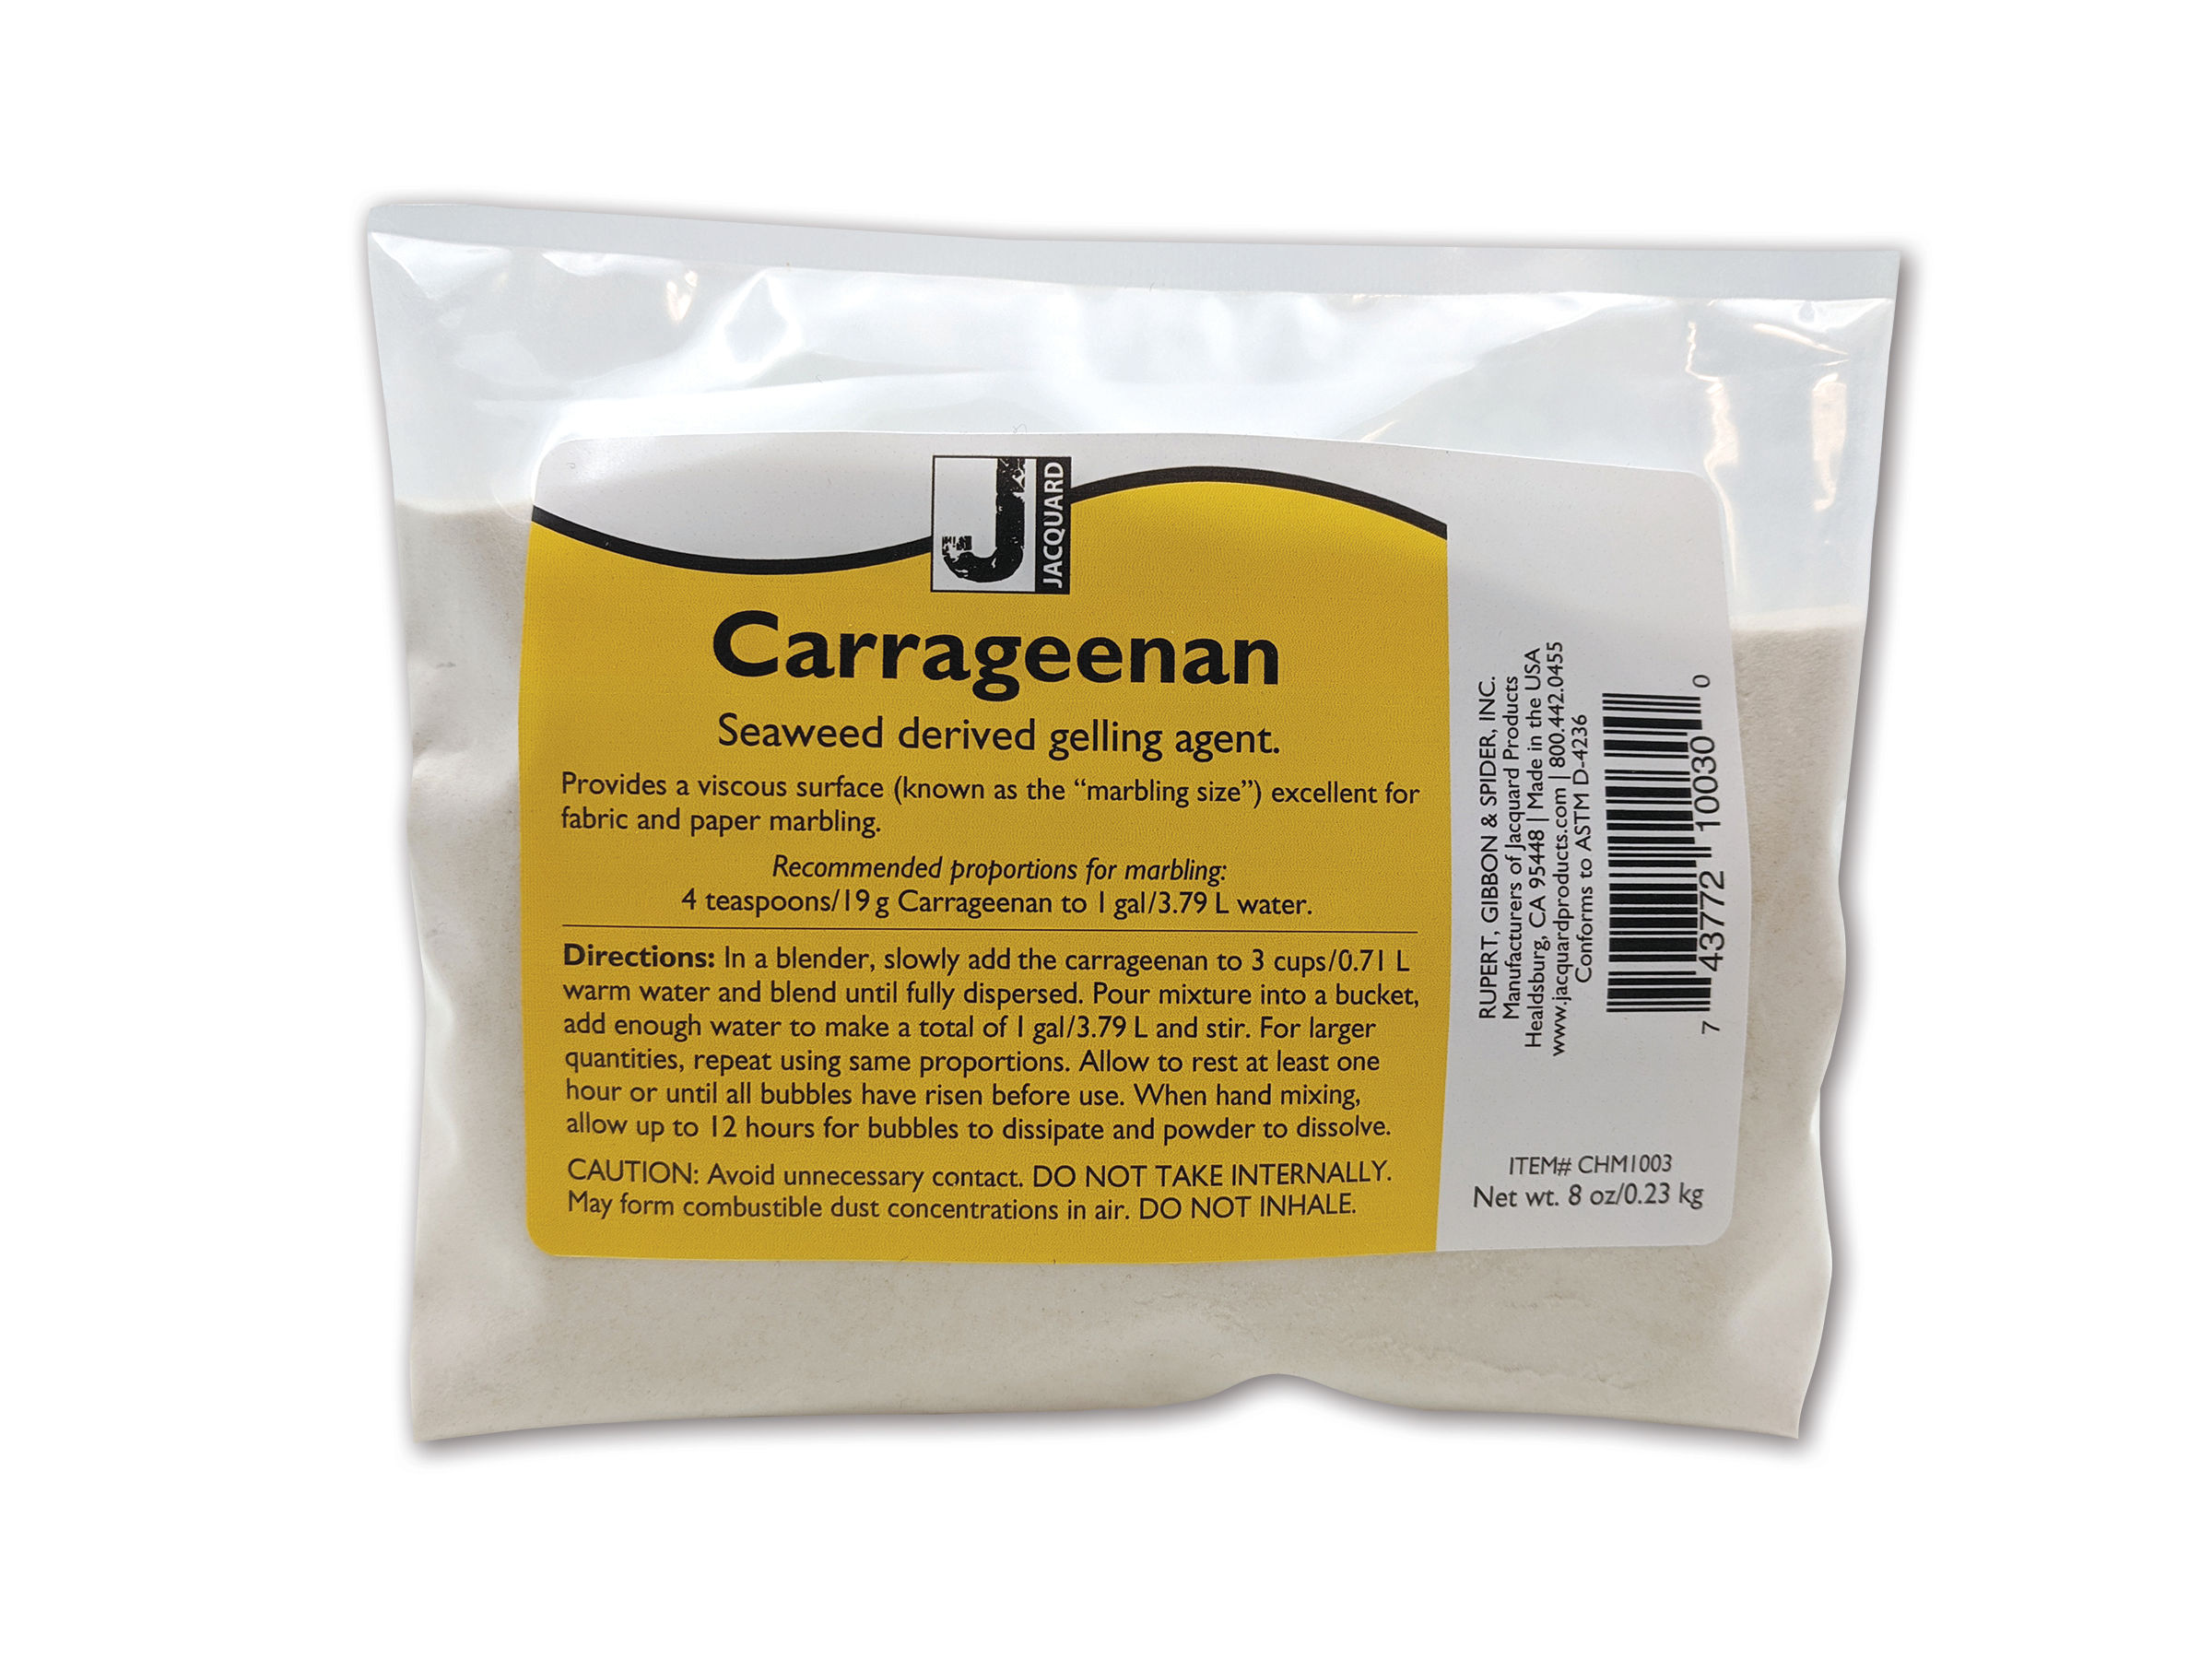 Carrageenan Marbling Size for Paper and Fabric Marbling 8 oz